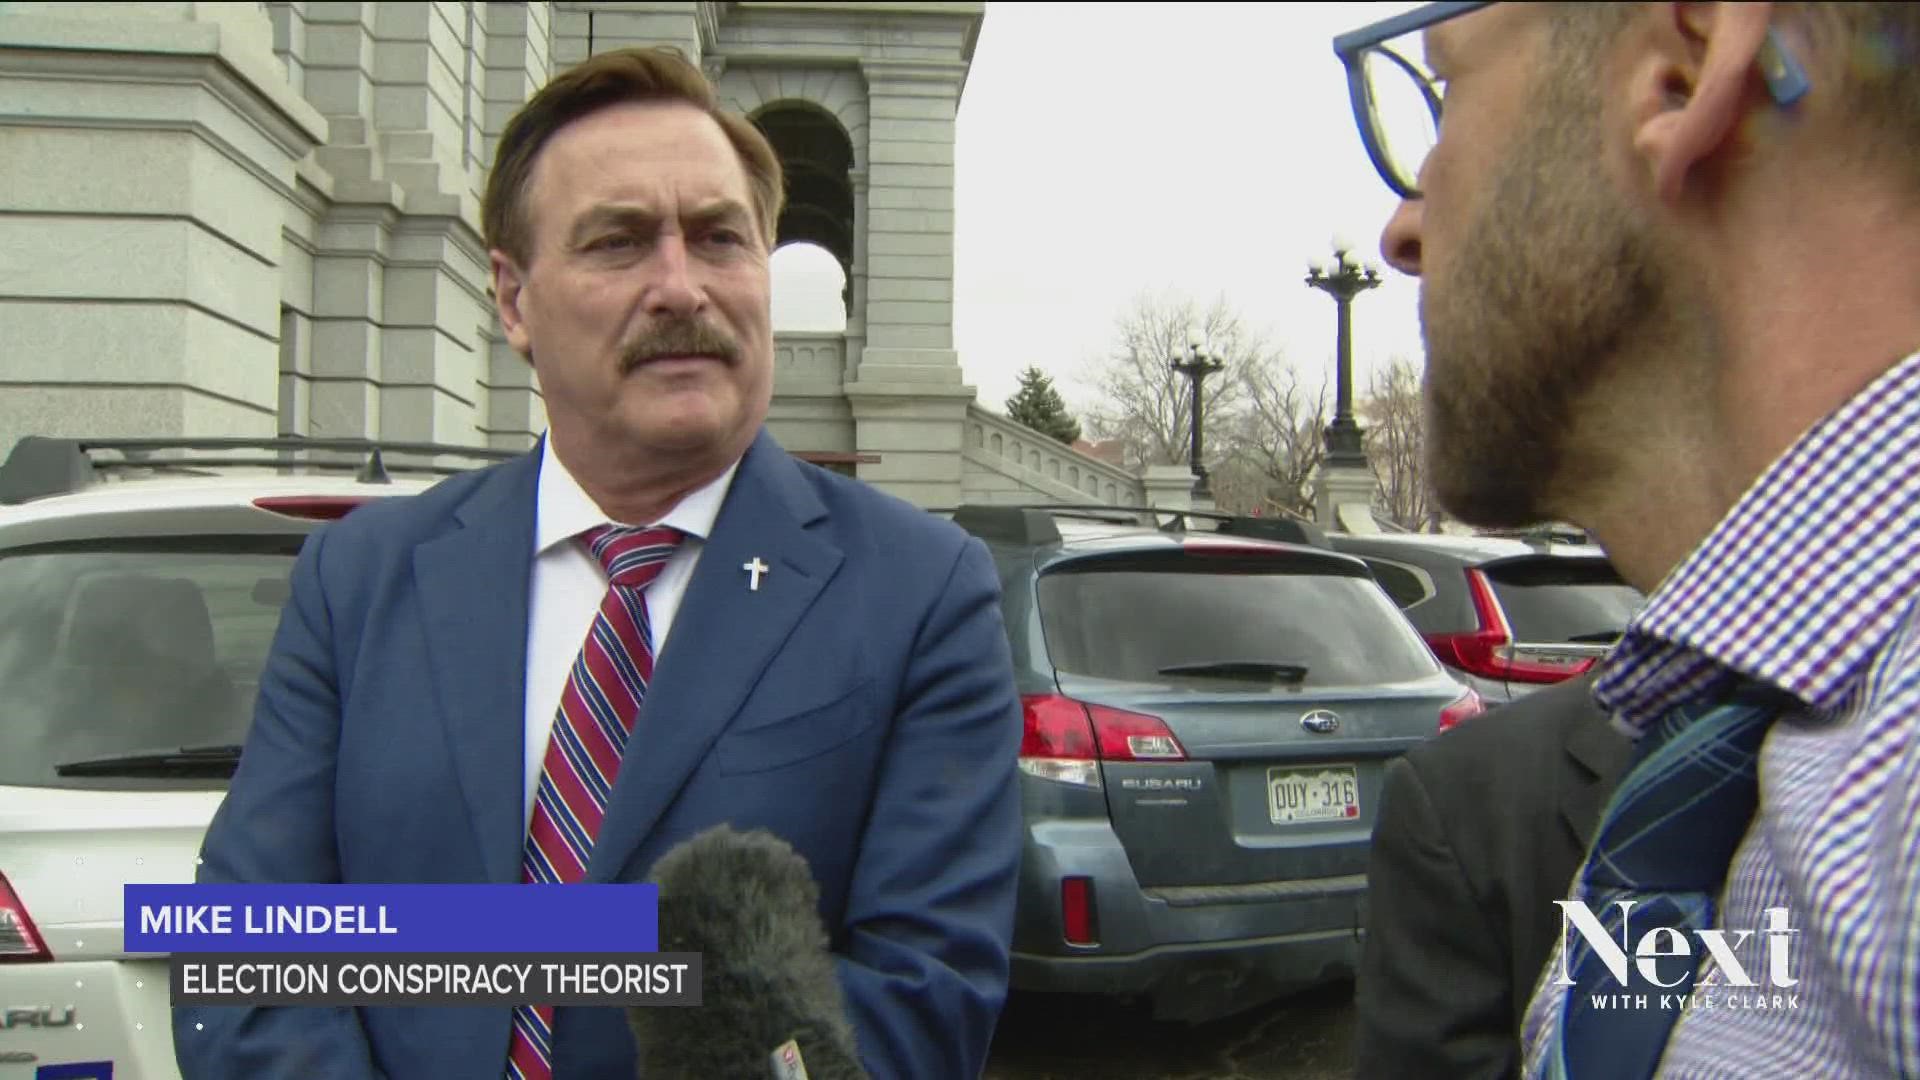 MyPillow CEO and vocal election conspiracy theorist Mike Lindell came to the steps of the Colorado Capitol on Tuesday to headline a rally promoting "election truth."